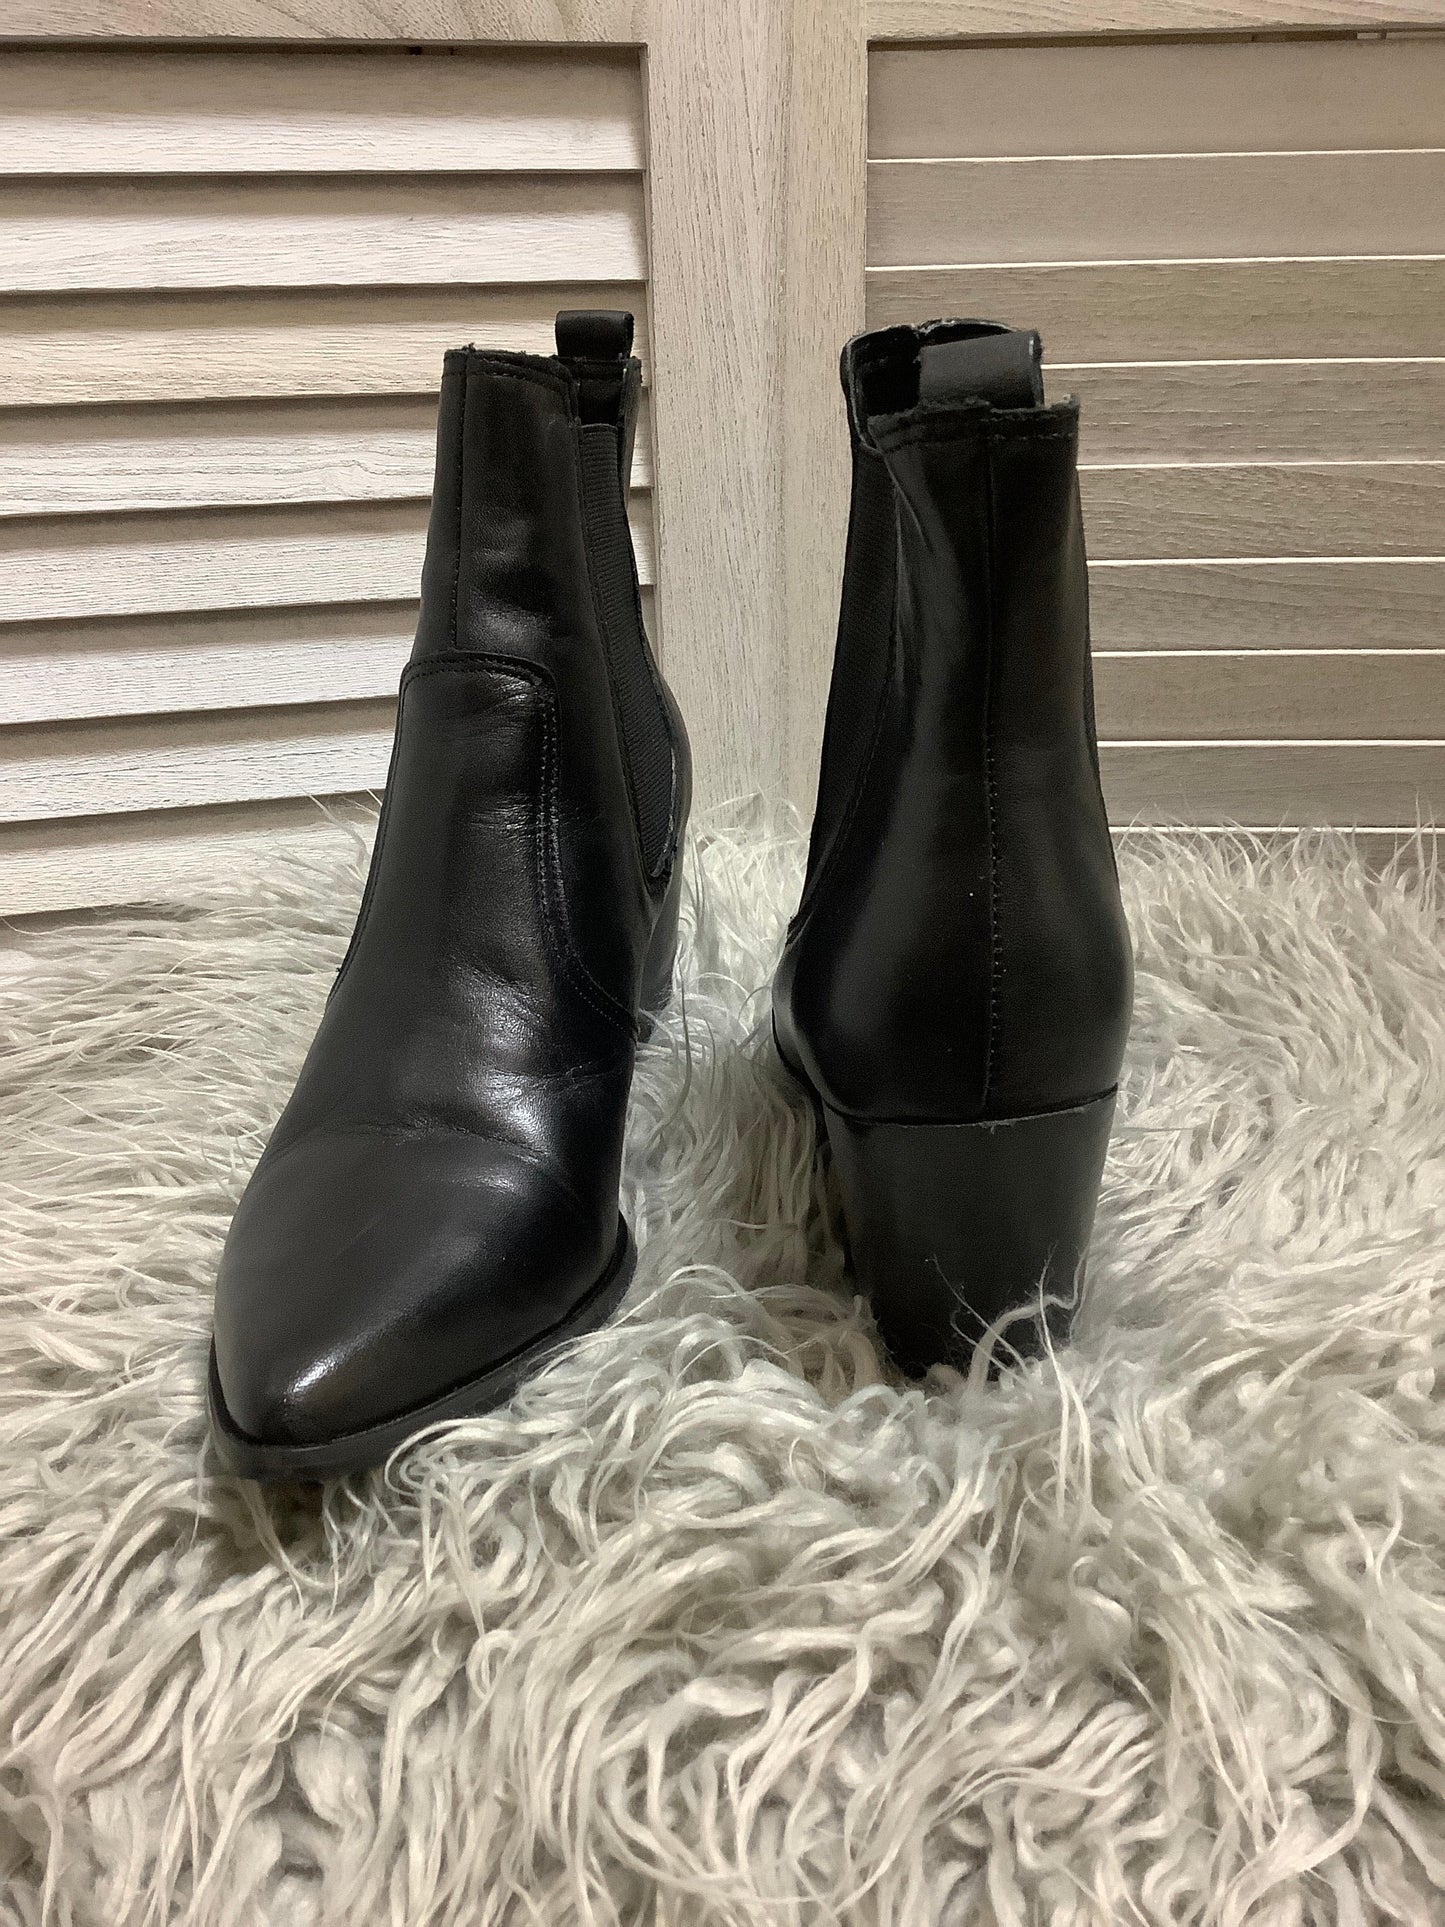 Boots Ankle Heels By Steve Madden  Size: 10